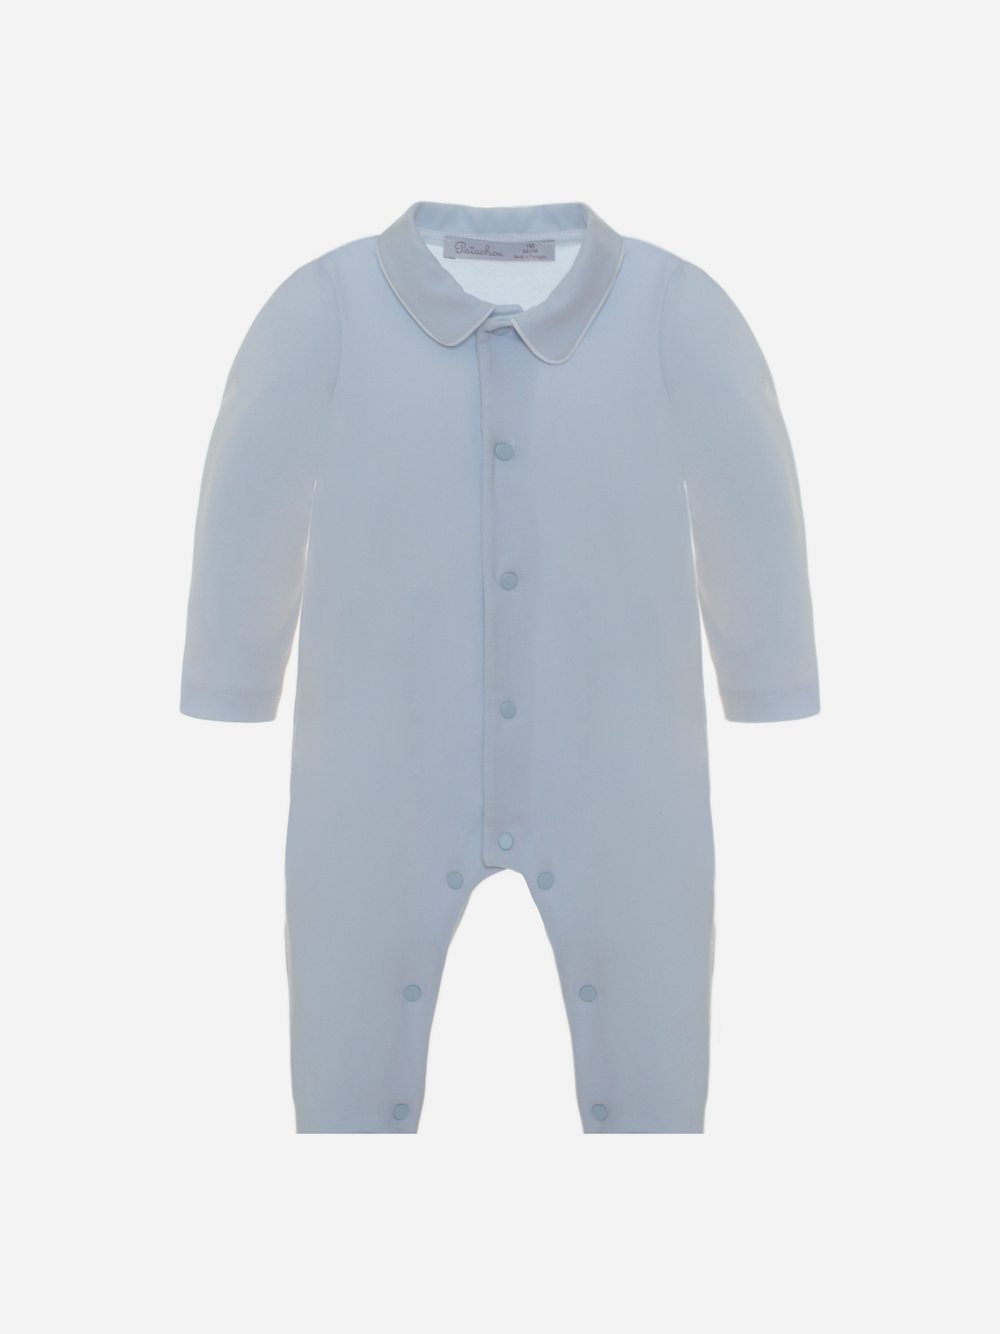 Basic babygrow for boys in blue jersey